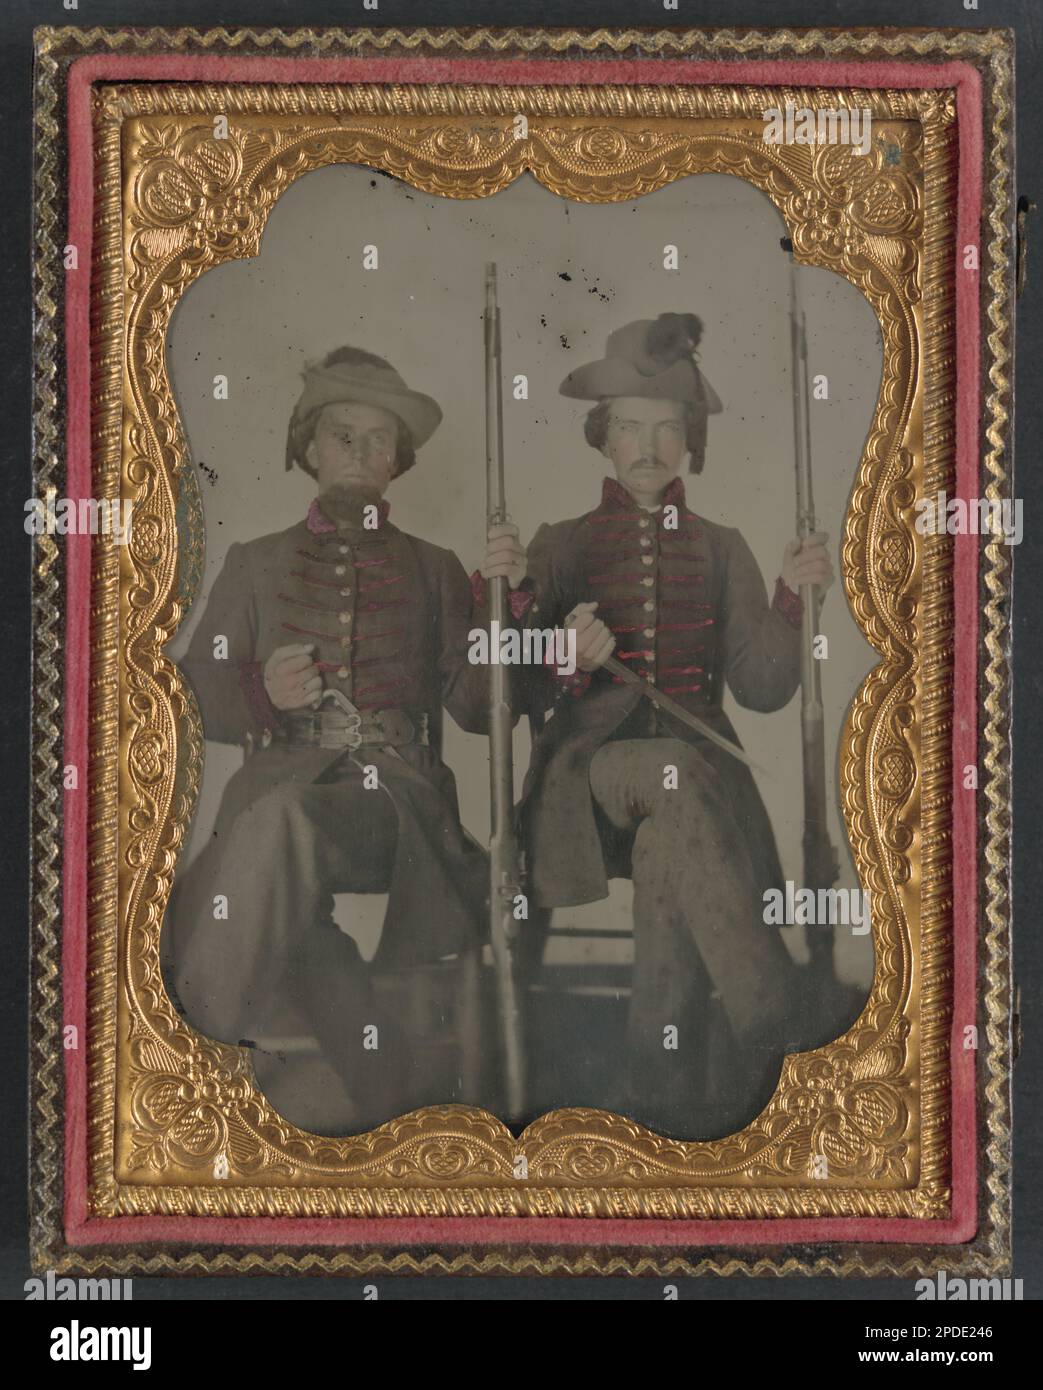 Two unidentified soldiers in early war Mississippi uniforms with muskets and bayonets. Liljenquist Family Collection of Civil War Photographs , FAmbrotype/Tintype photograph filing series , Published in: Military images. Export, Pa, November/December 2011 (XXXI, 3), p. 37, NewsetLilj03, pp/liljconfed. Confederate States of America, Army, People, 1860-1870, Soldiers, Confederate, 1860-1870, Military uniforms, Confederate, 1860-1870, Rifles, 1860-1870, Bayonets, 1860-1870, United States, History, Civil War, 1861-1865, Military personnel, Confederate. Stock Photo